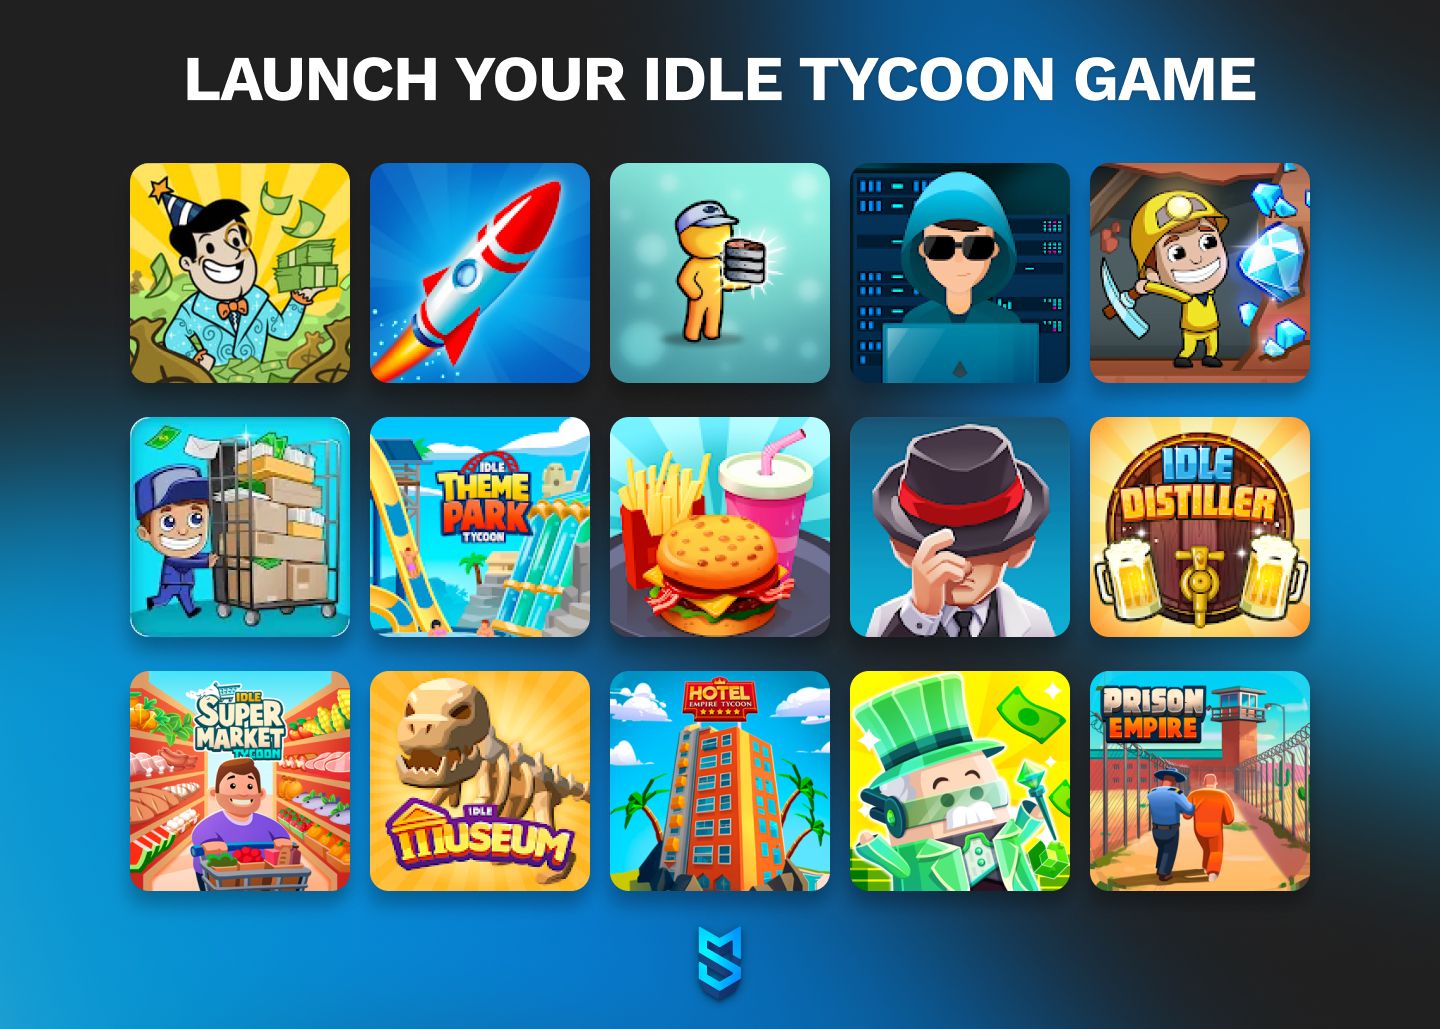 Launch your idle tycoon game